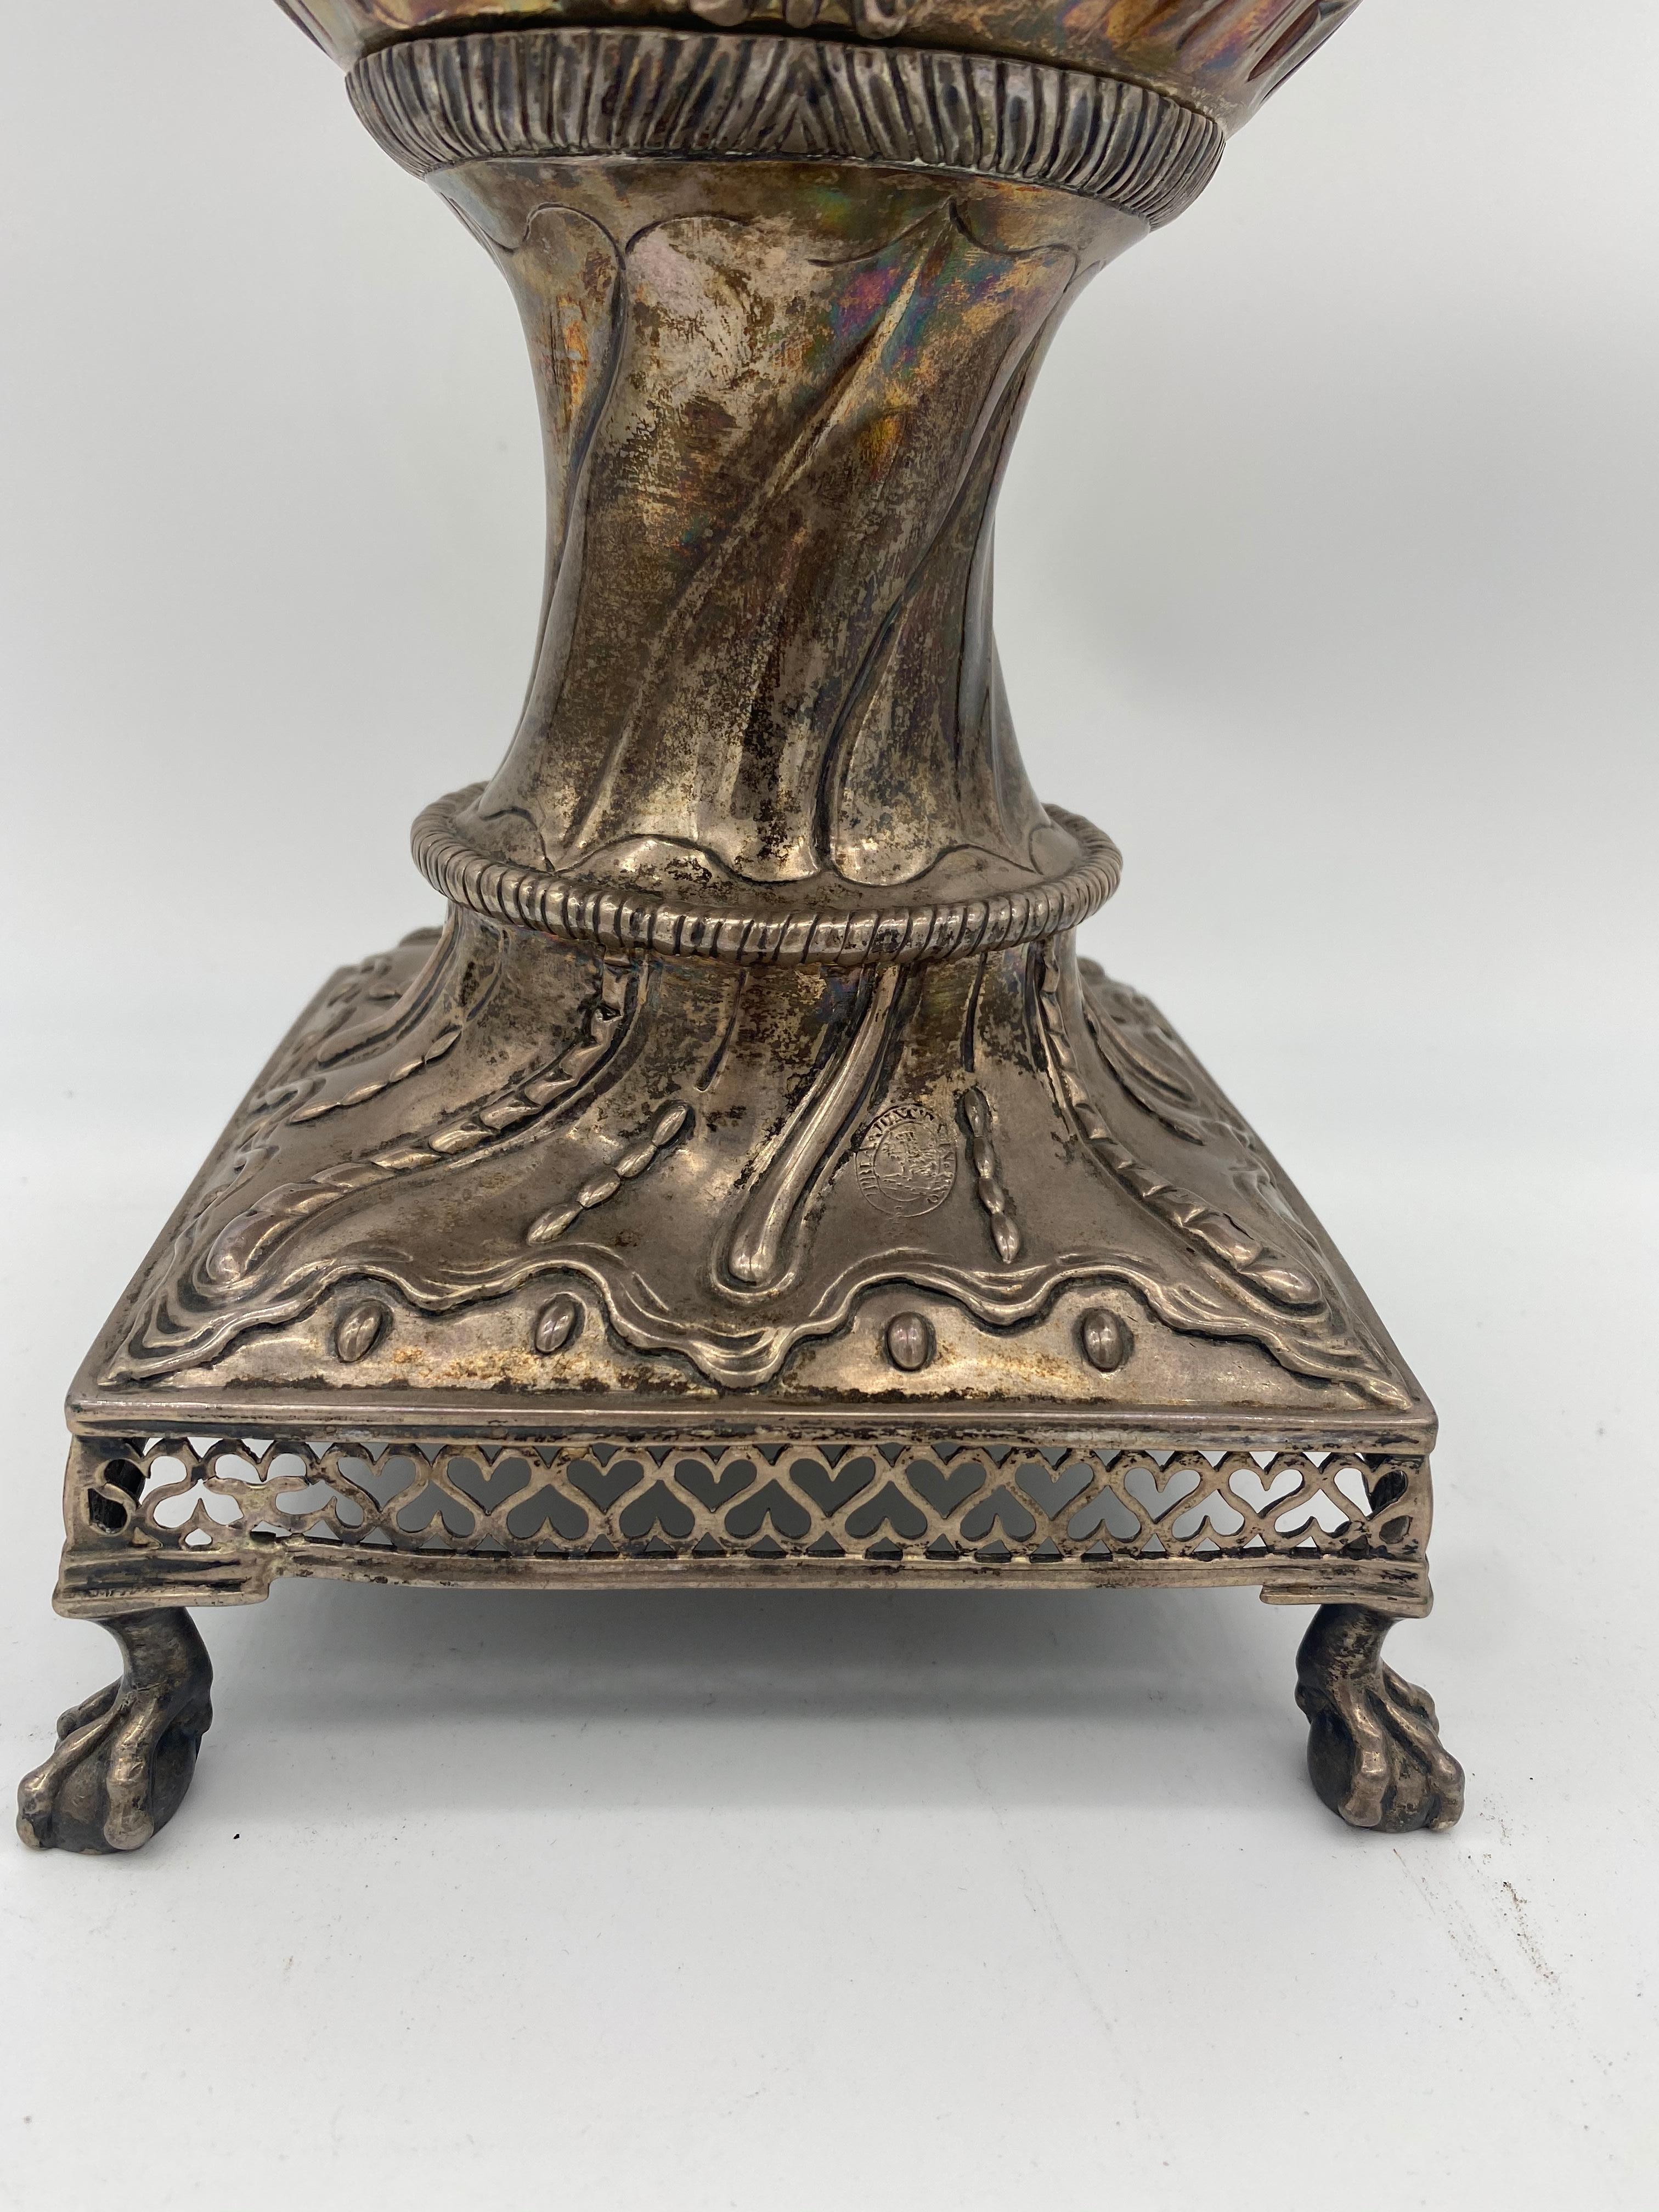 18th century sterling silver water urn. All parts have been labeled Tria Juncta In Uno. Very large with 2945 grams and 20 inches tall. Extremely unique and very hard to mind, a magnificent piece.